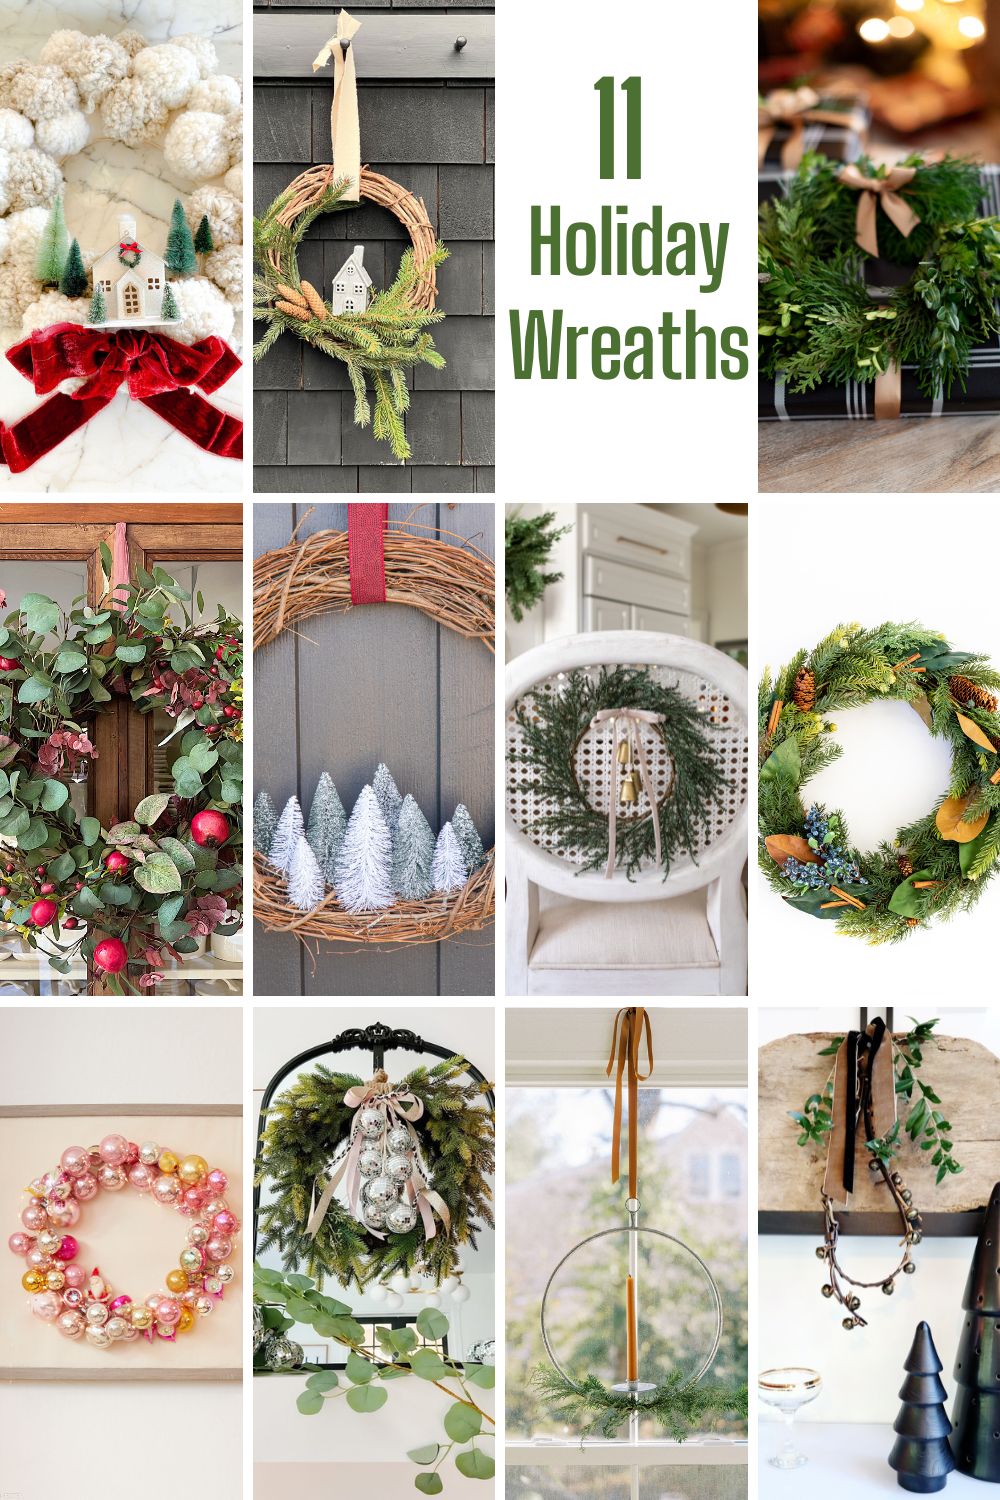 My Christmas decor theme this year is pomegranates. Are you ready to see how to make this easy DIY Christmas eucalyptus wreath with pomegranates?